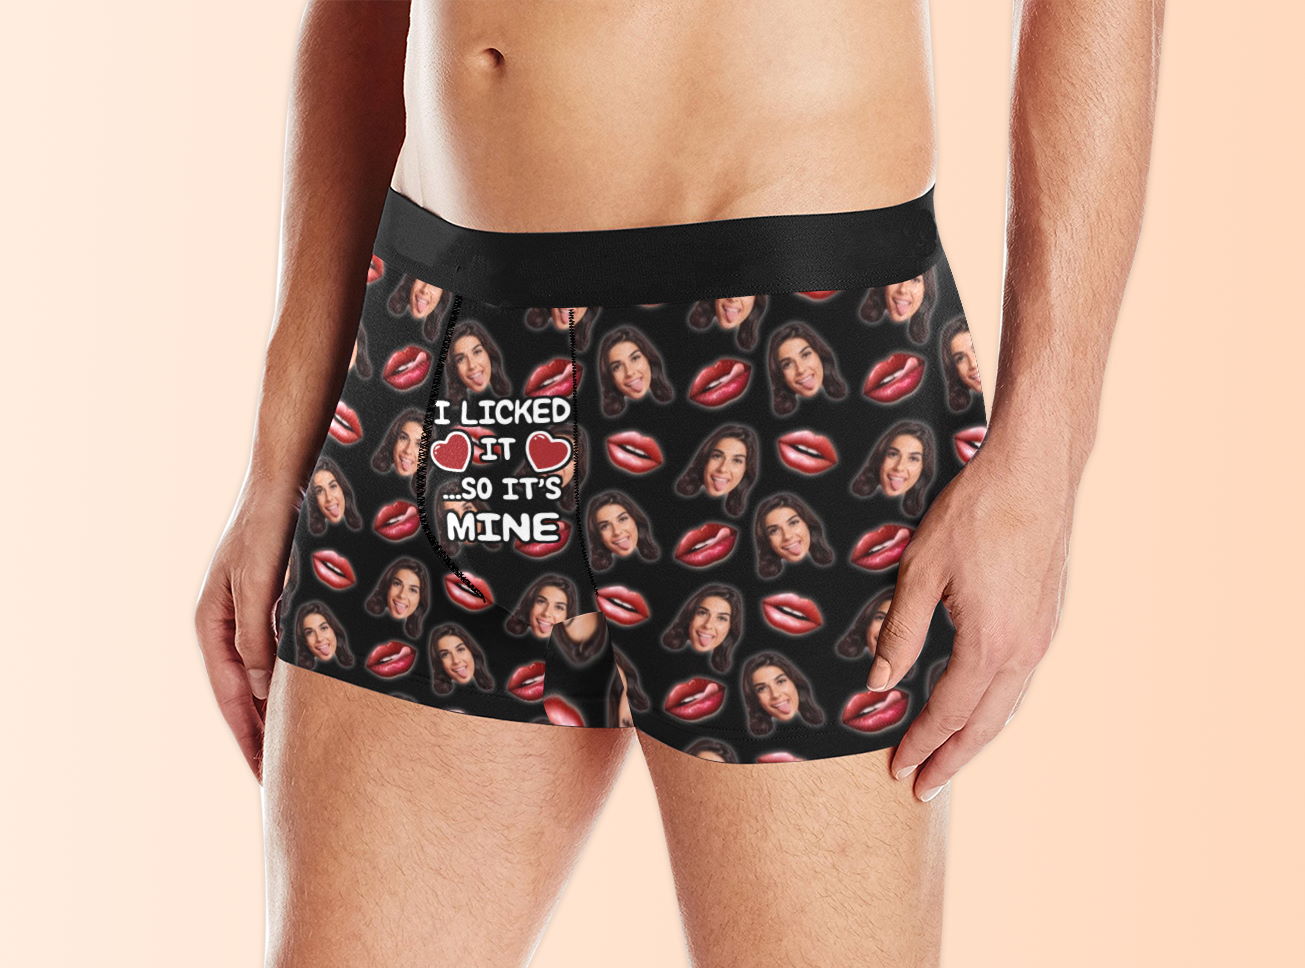 https://passionify.com/wp-content/uploads/2023/02/Personalized-Mens-Boxer-Briefs-with-Girlfriends-photo-on-it-Custom-Picture-Underwear-Gift-for-Valentines-Day-I-licked-it-so-its-mine-funny-boyfriend-underwear-3.jpg